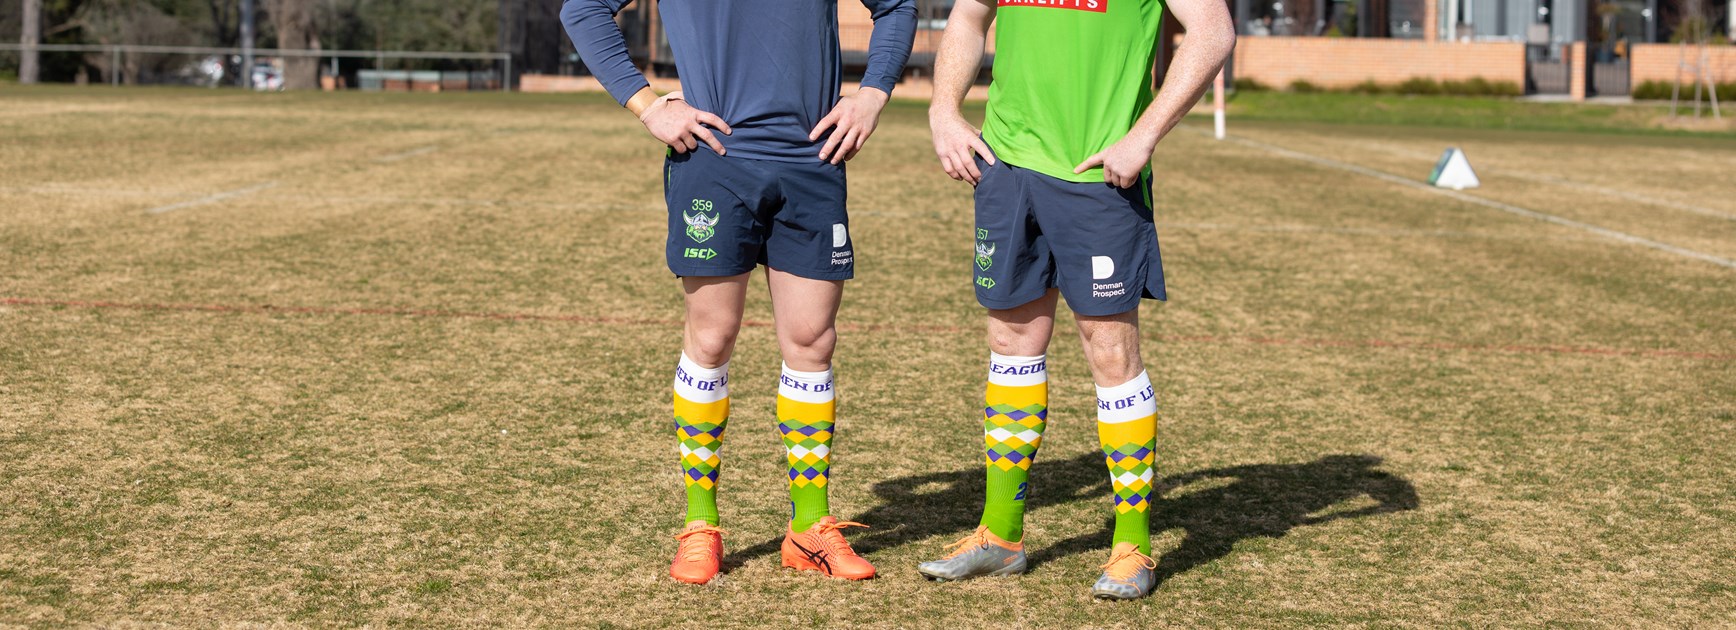 Hudson Young (left) and Corey Horsburgh show off Canberra's Crazy Socks. Credit: Canberra Raiders